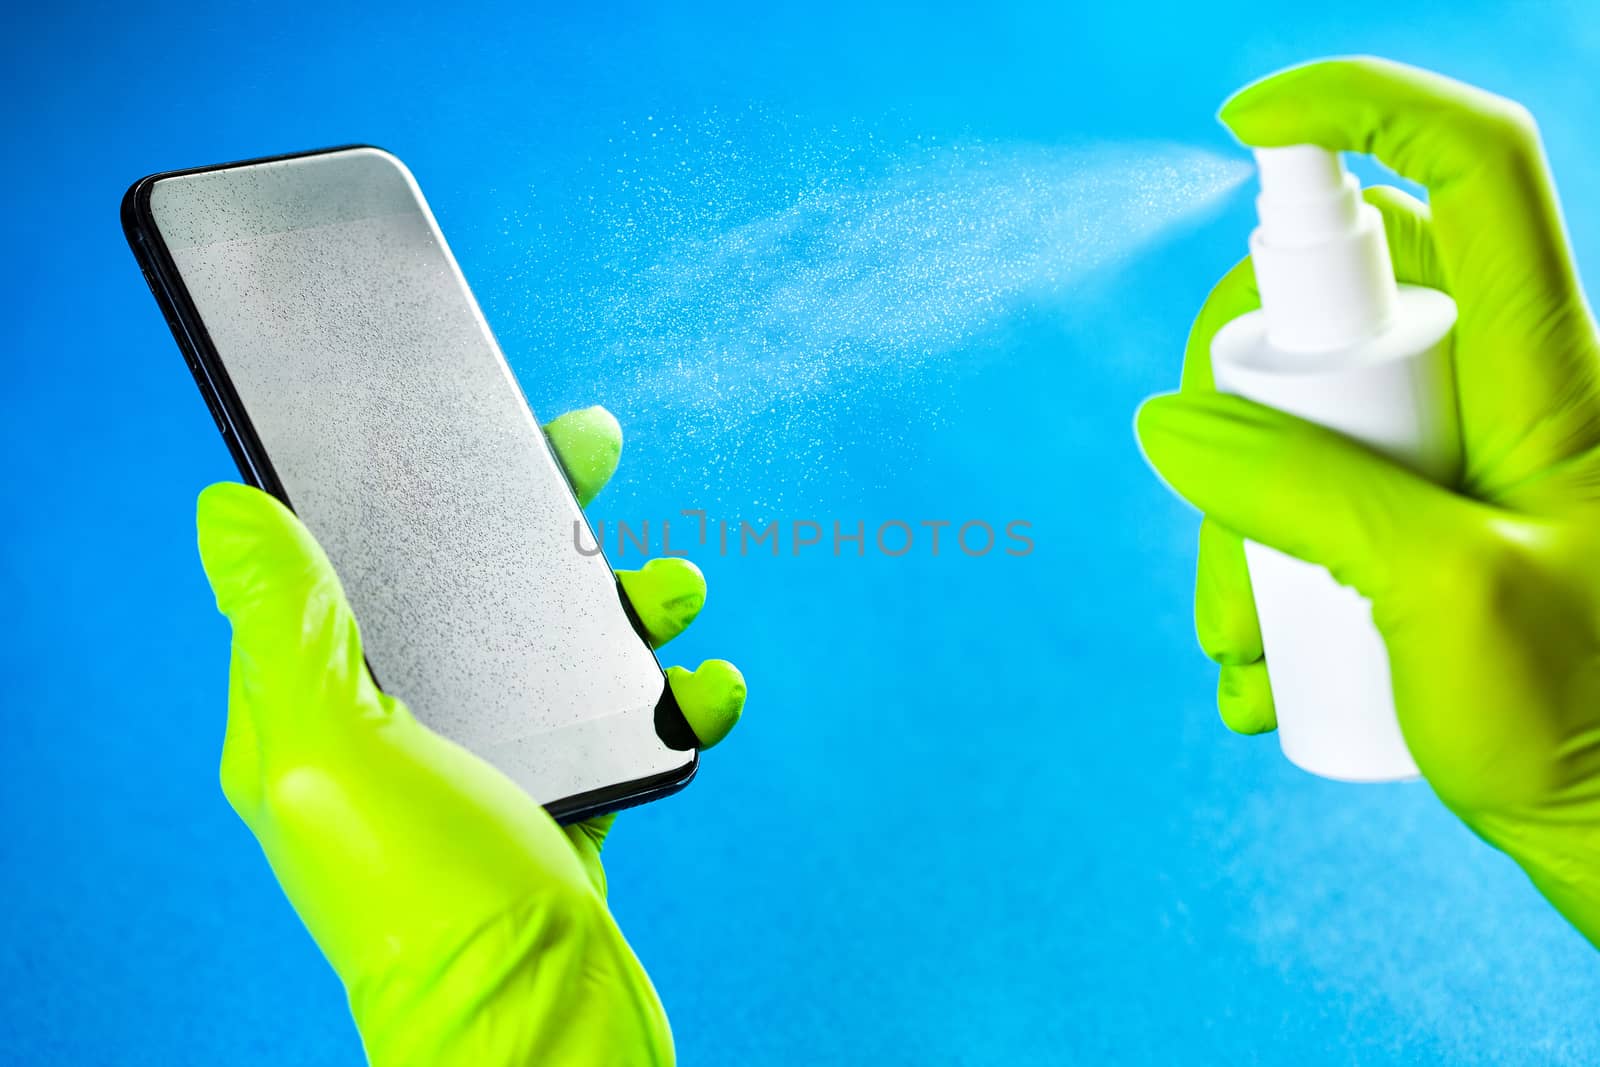 Hands in green gloves spraying antibacterial antiseptic sanitizer onto mobile phone screen,Coronavirus COVID-19 global pandemic crisis,protection and prevention from infection spreading & transfer